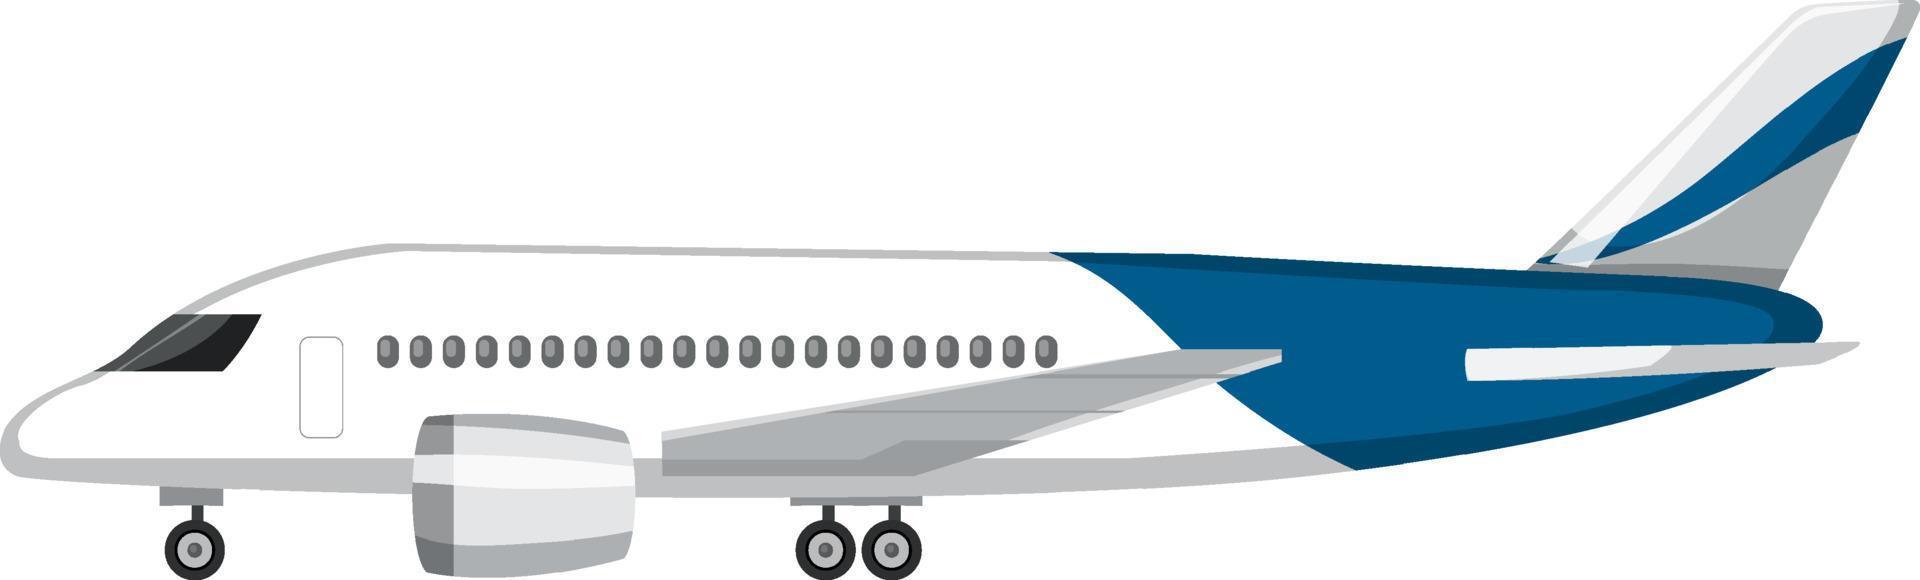 An airplane in cartoon style isolated vector